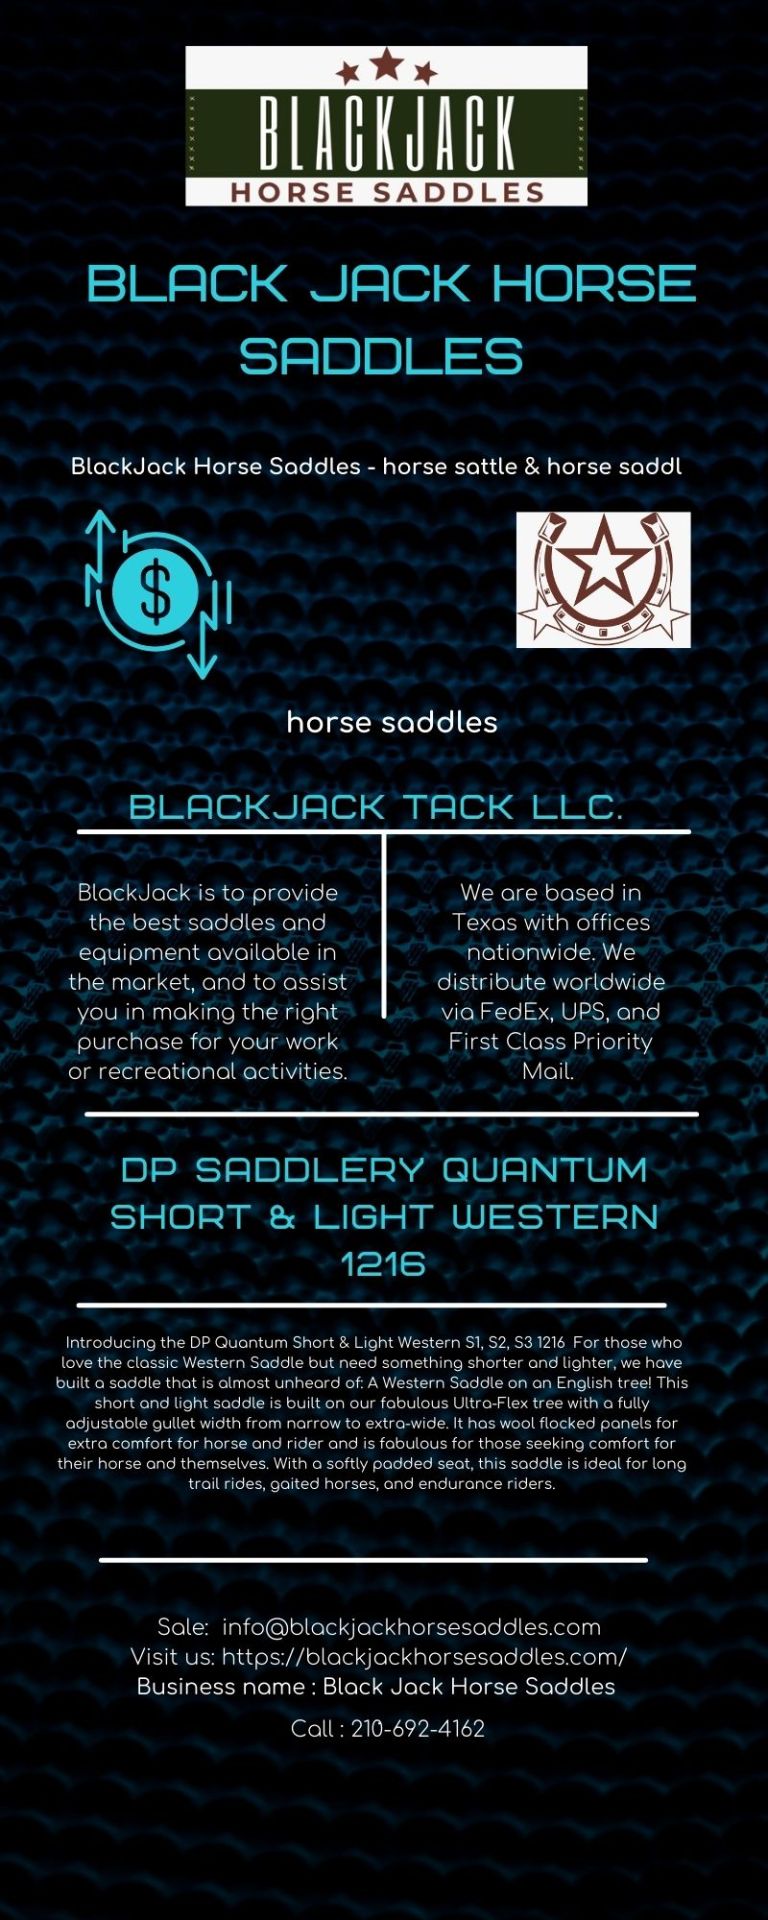 BlackJack Horse Saddles - horse sattle & horse saddlShop Here for Quality, American Made horse saddles! We deal with horses saddles, saddles horse, horse sattle, horse saddl. Our Customer Service Is Our #1 Priority! As Always, Free Shipping On All Orders Over $100. #horse saddlehorse saddleshorses saddlessaddles horsehorse sadlehorse sattlehorse saddlbilly cook saddlesbilly cooksaddles westernwestern sad